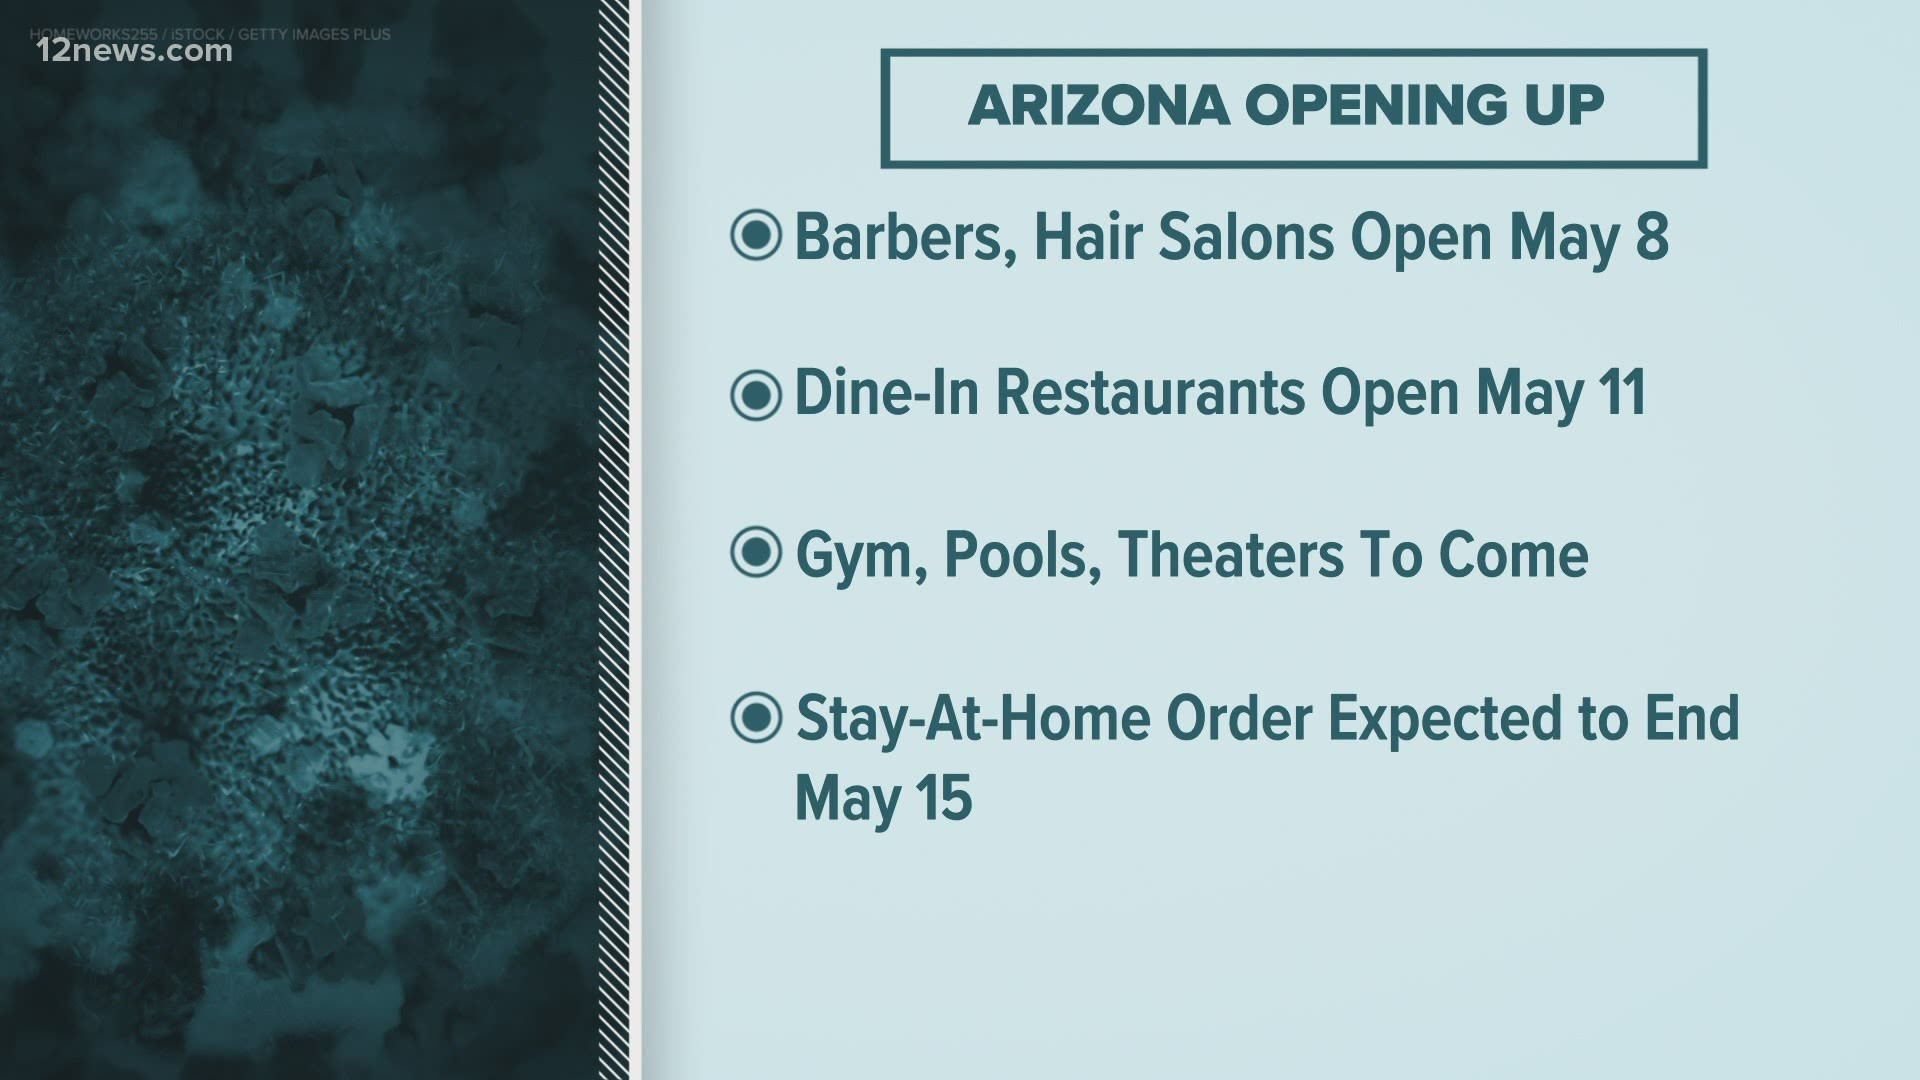 On May 8th hair salons and barbers can open if they follow the governor's safety guidelines. On May 11 restaurants can open for if they also follow safety guidelines